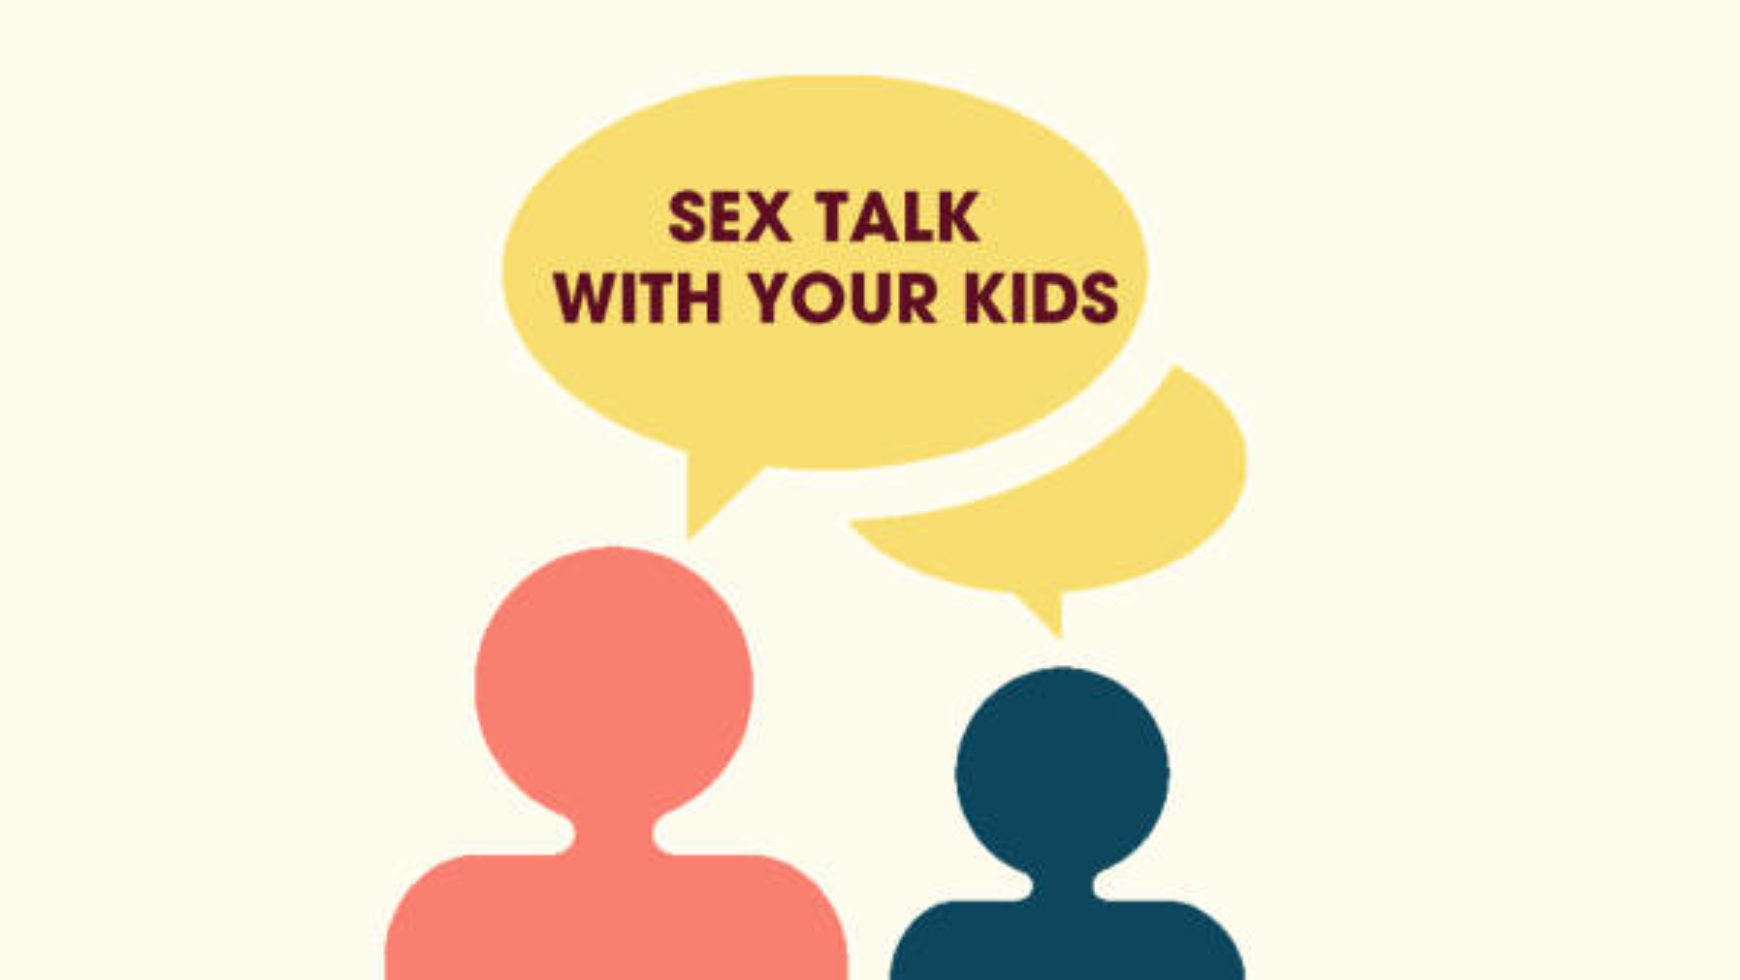 SEX TALK WITH YOUR KIDS